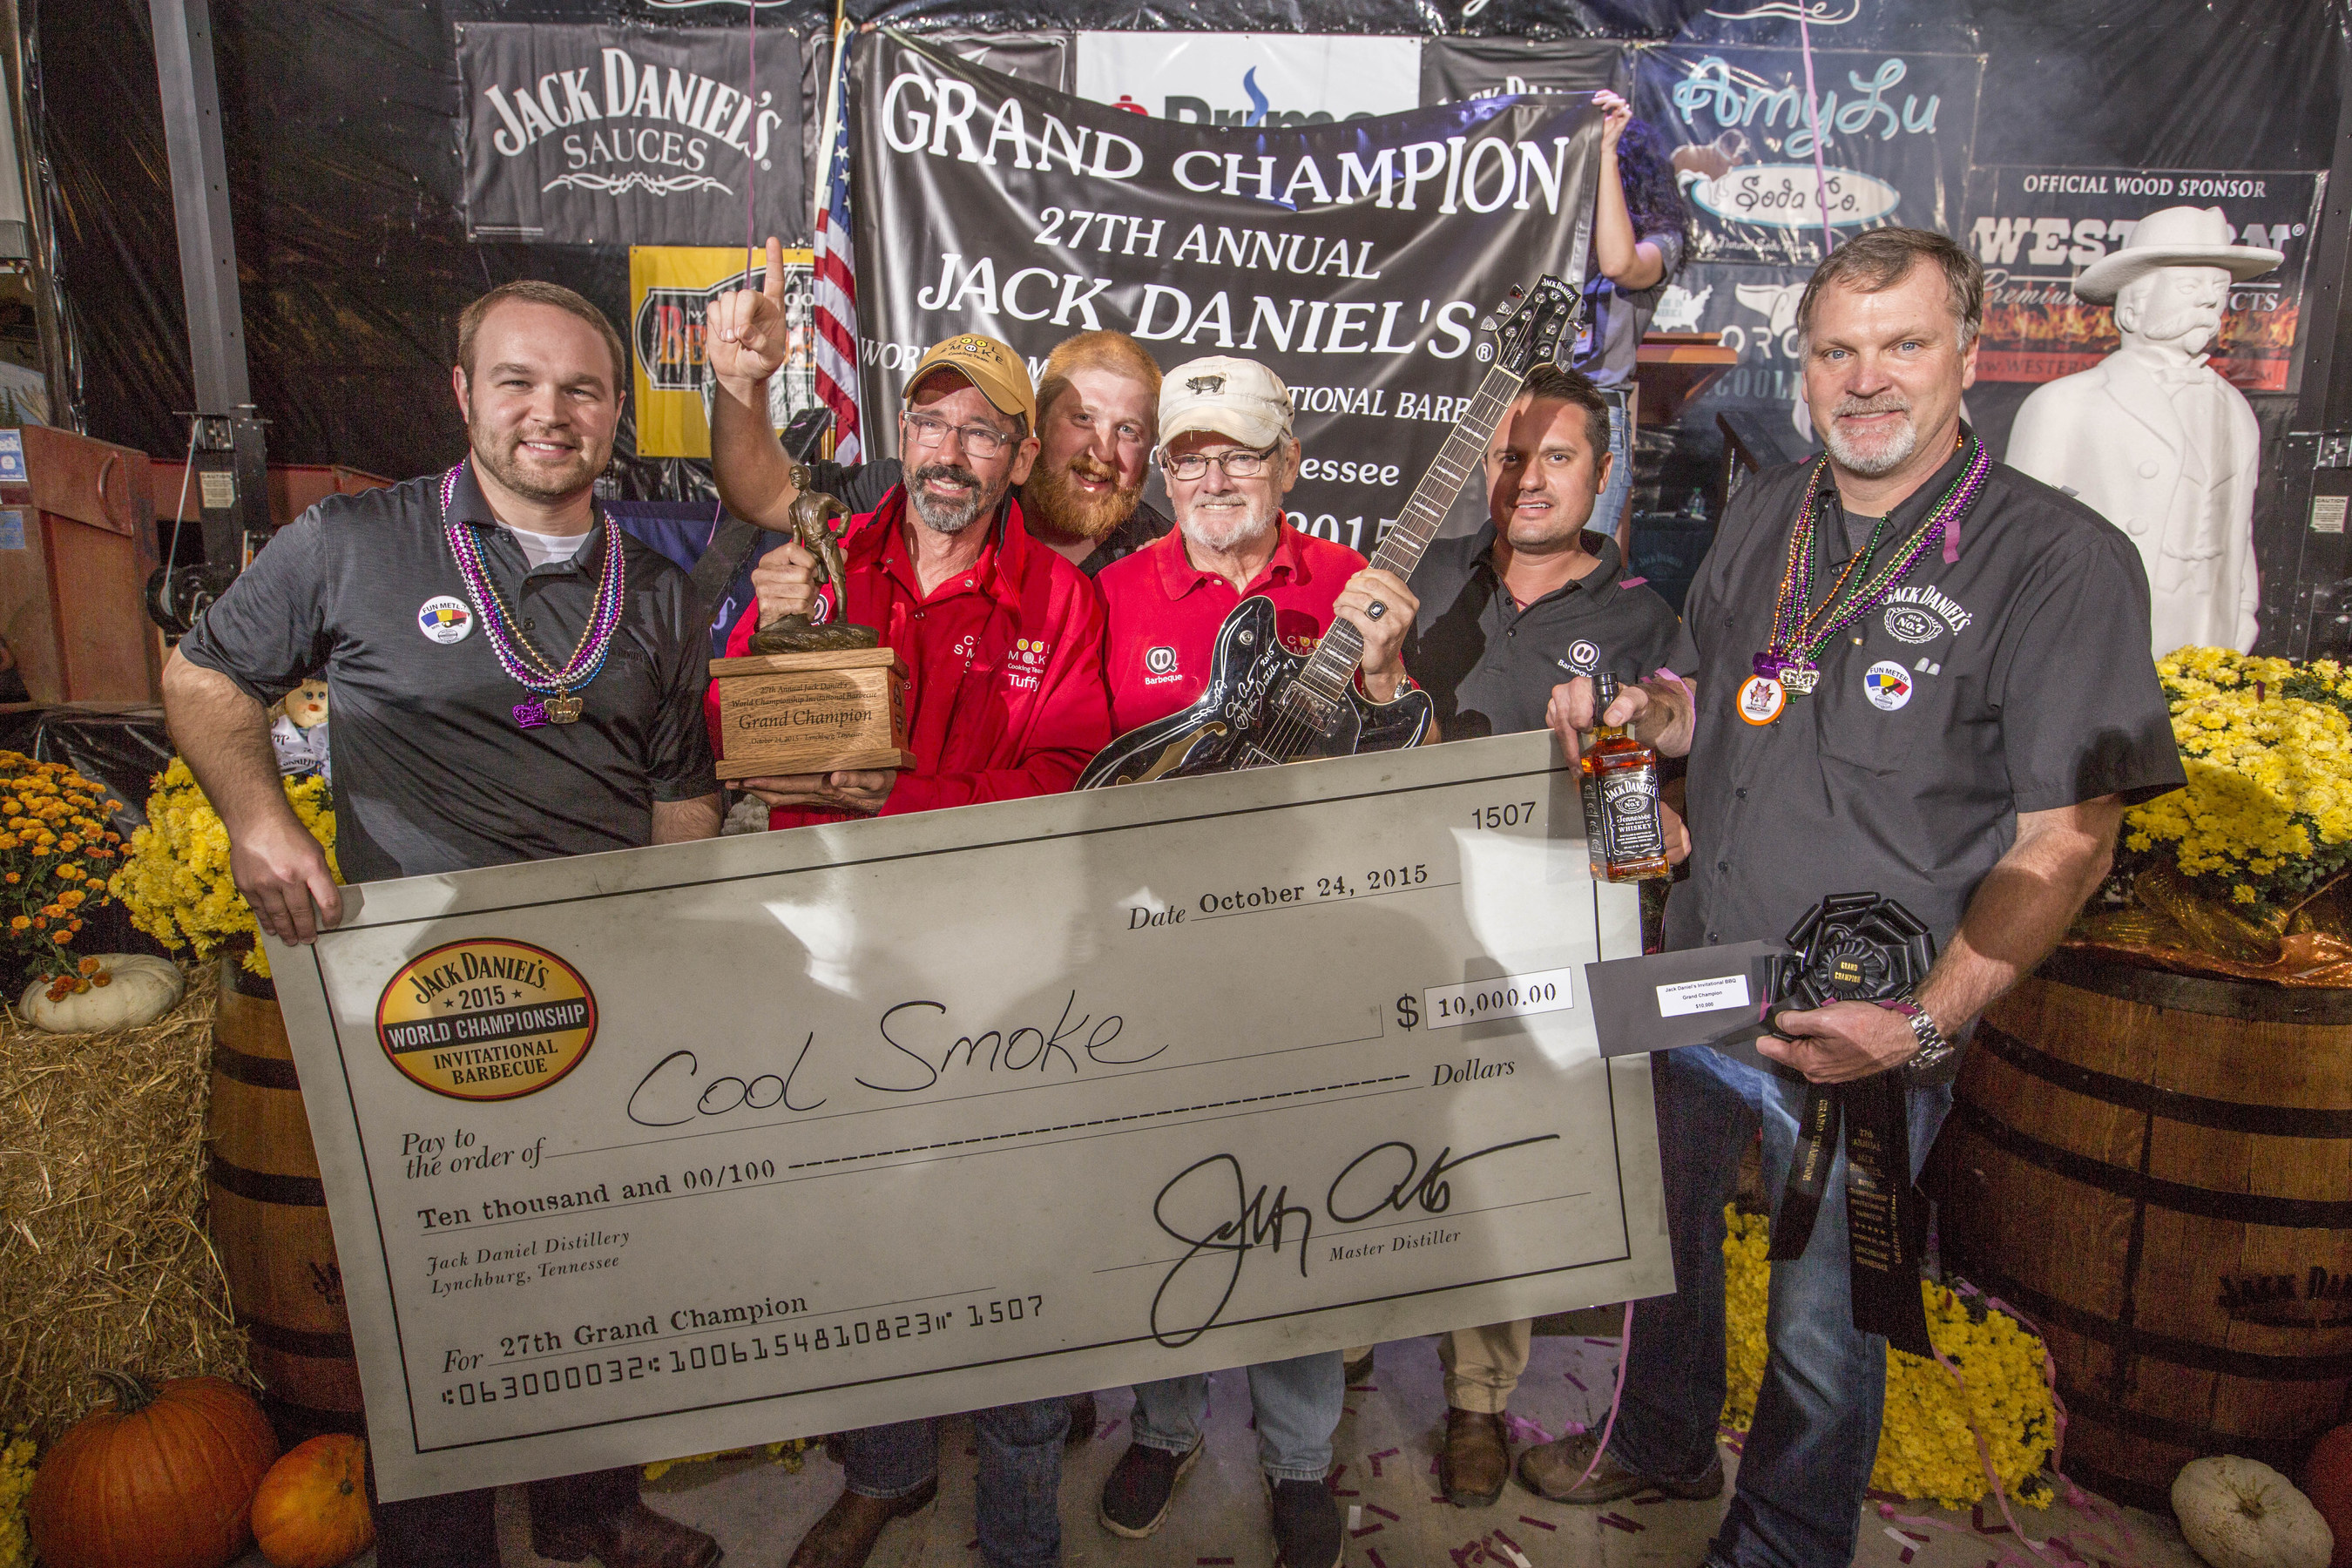 Tuffy Stone of Richmond, Va. wins the 27th Annual Jack Daniel's World Championship Invitational Barbecue on October 24 in Lynchburg, Tenn. This makes a total of 4 World Championships within 24 months making Stone the undeniable most successful pitmaster on the professional competitive barbecue circuit.